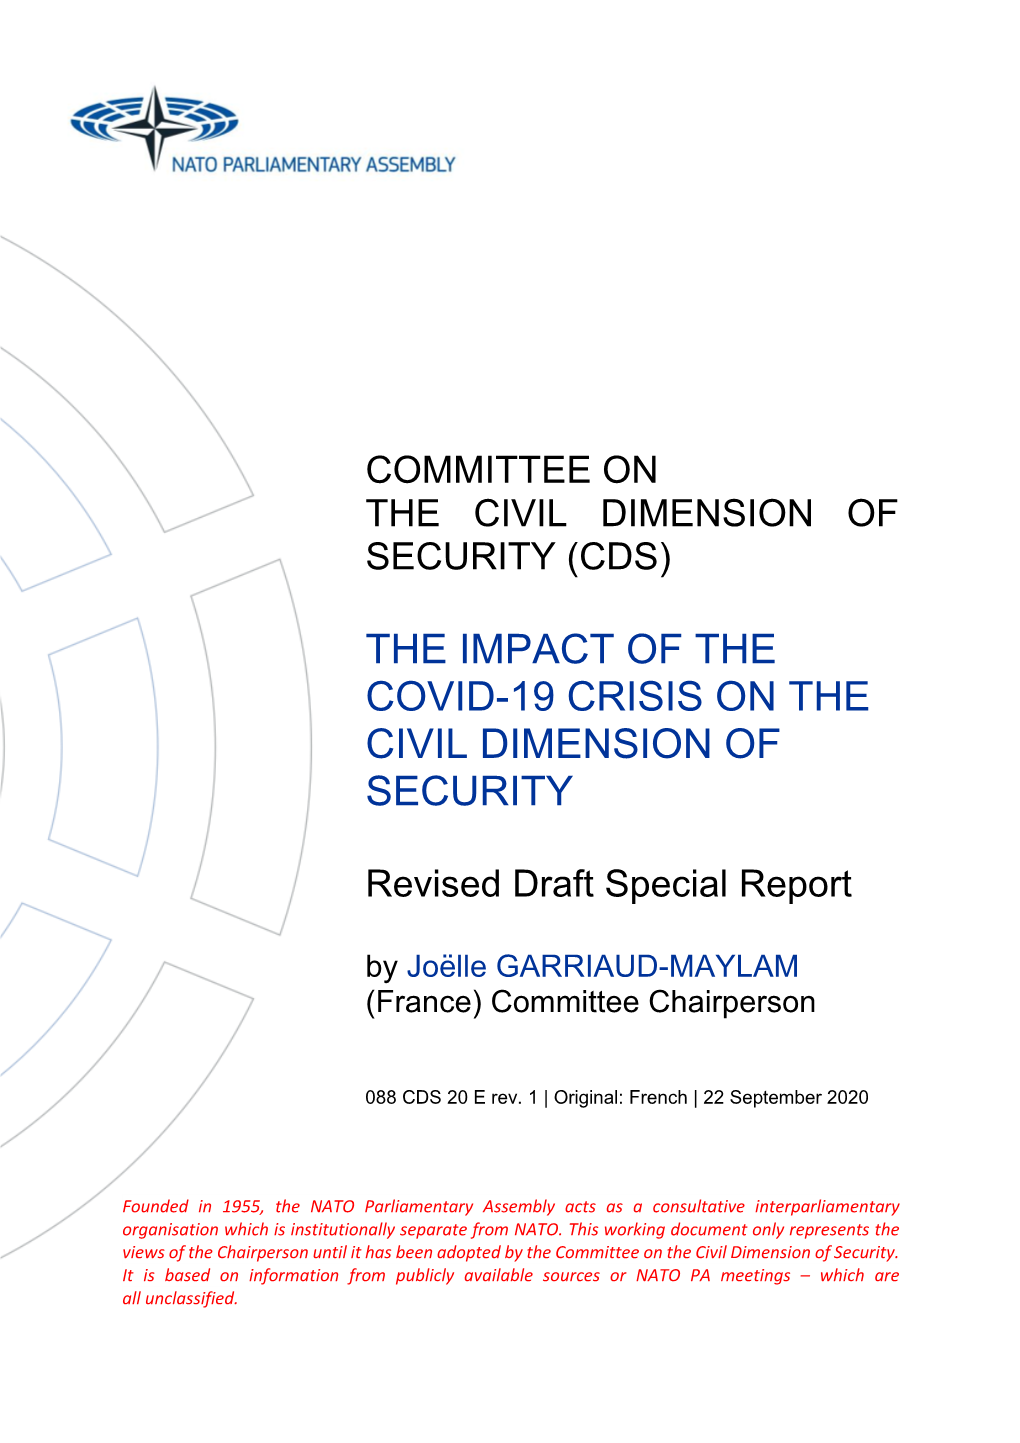 The Impact of the Covid-19 Crisis on the Civil Dimension of Security